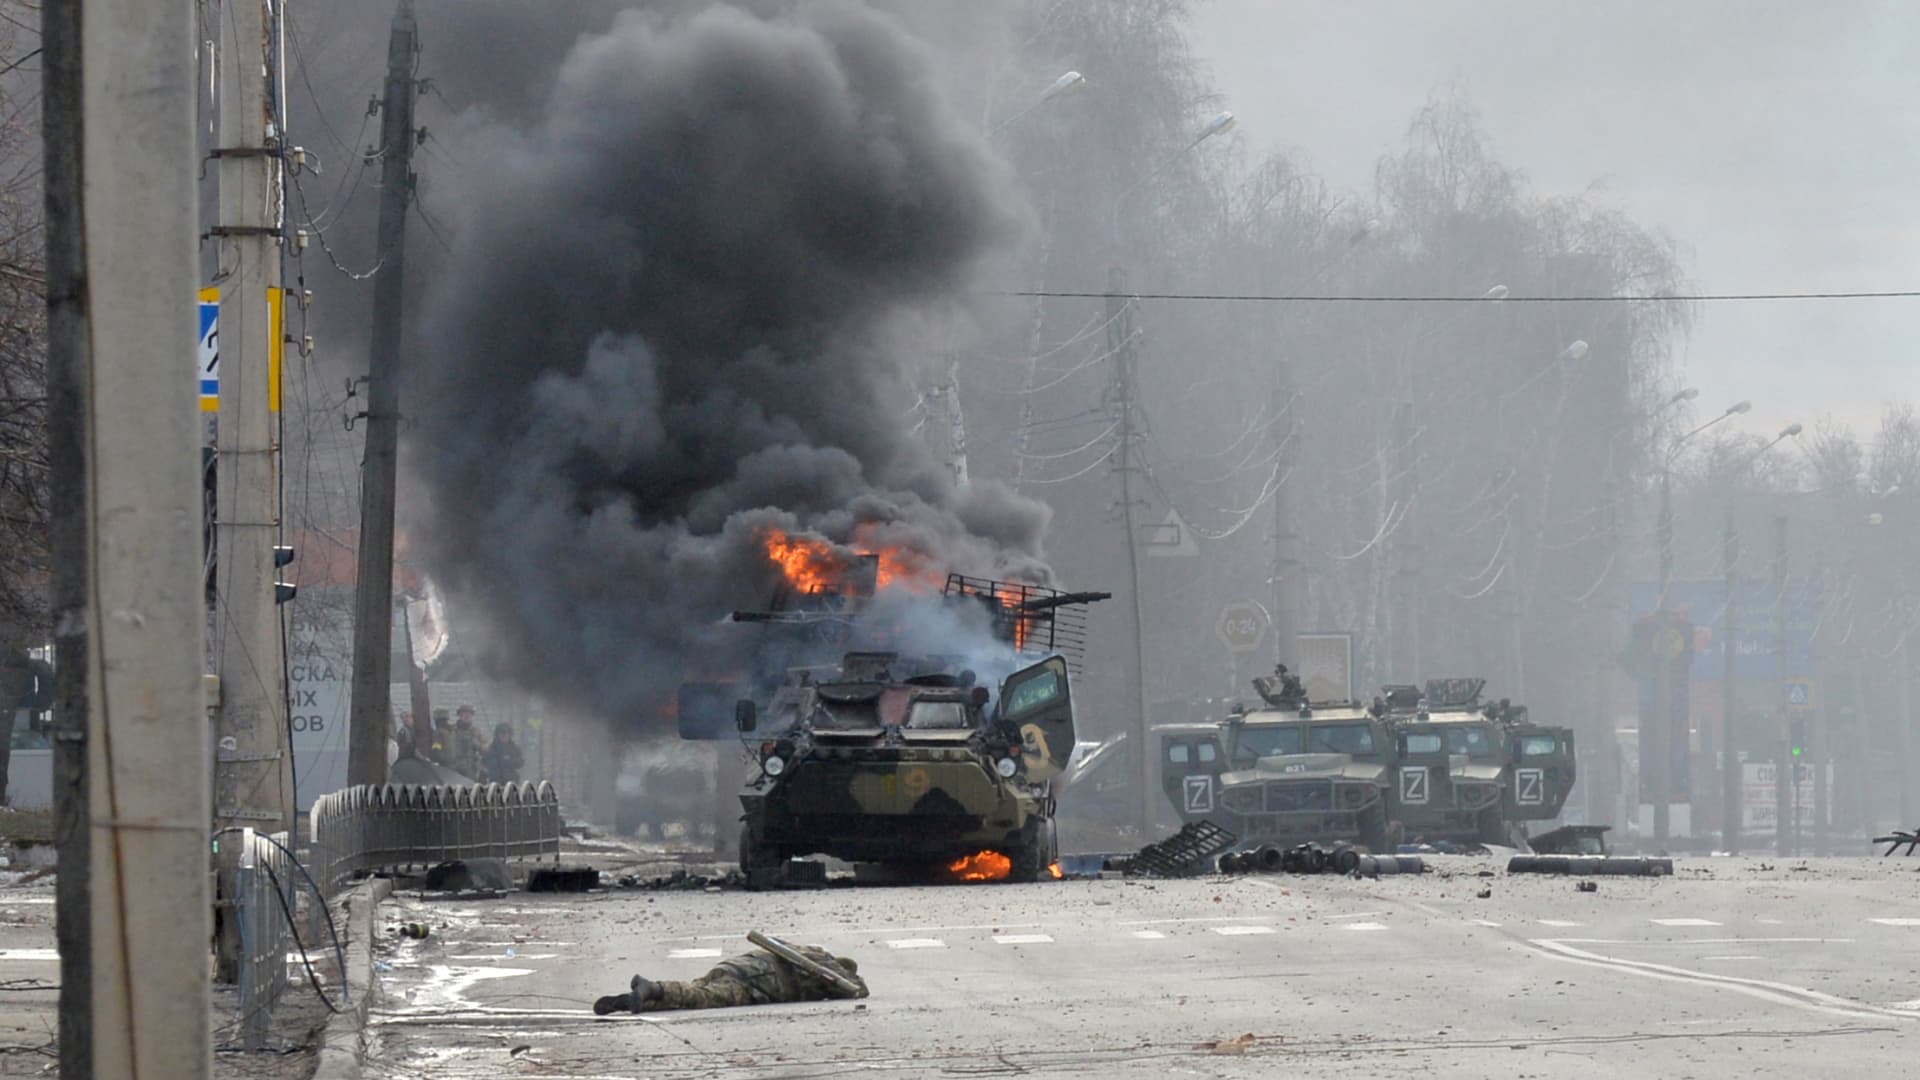 This photograph taken on February 26, 2022 shows a Russian Armoured personnel carrierburning during fight with the Ukrainian armed forces in Kharkiv.